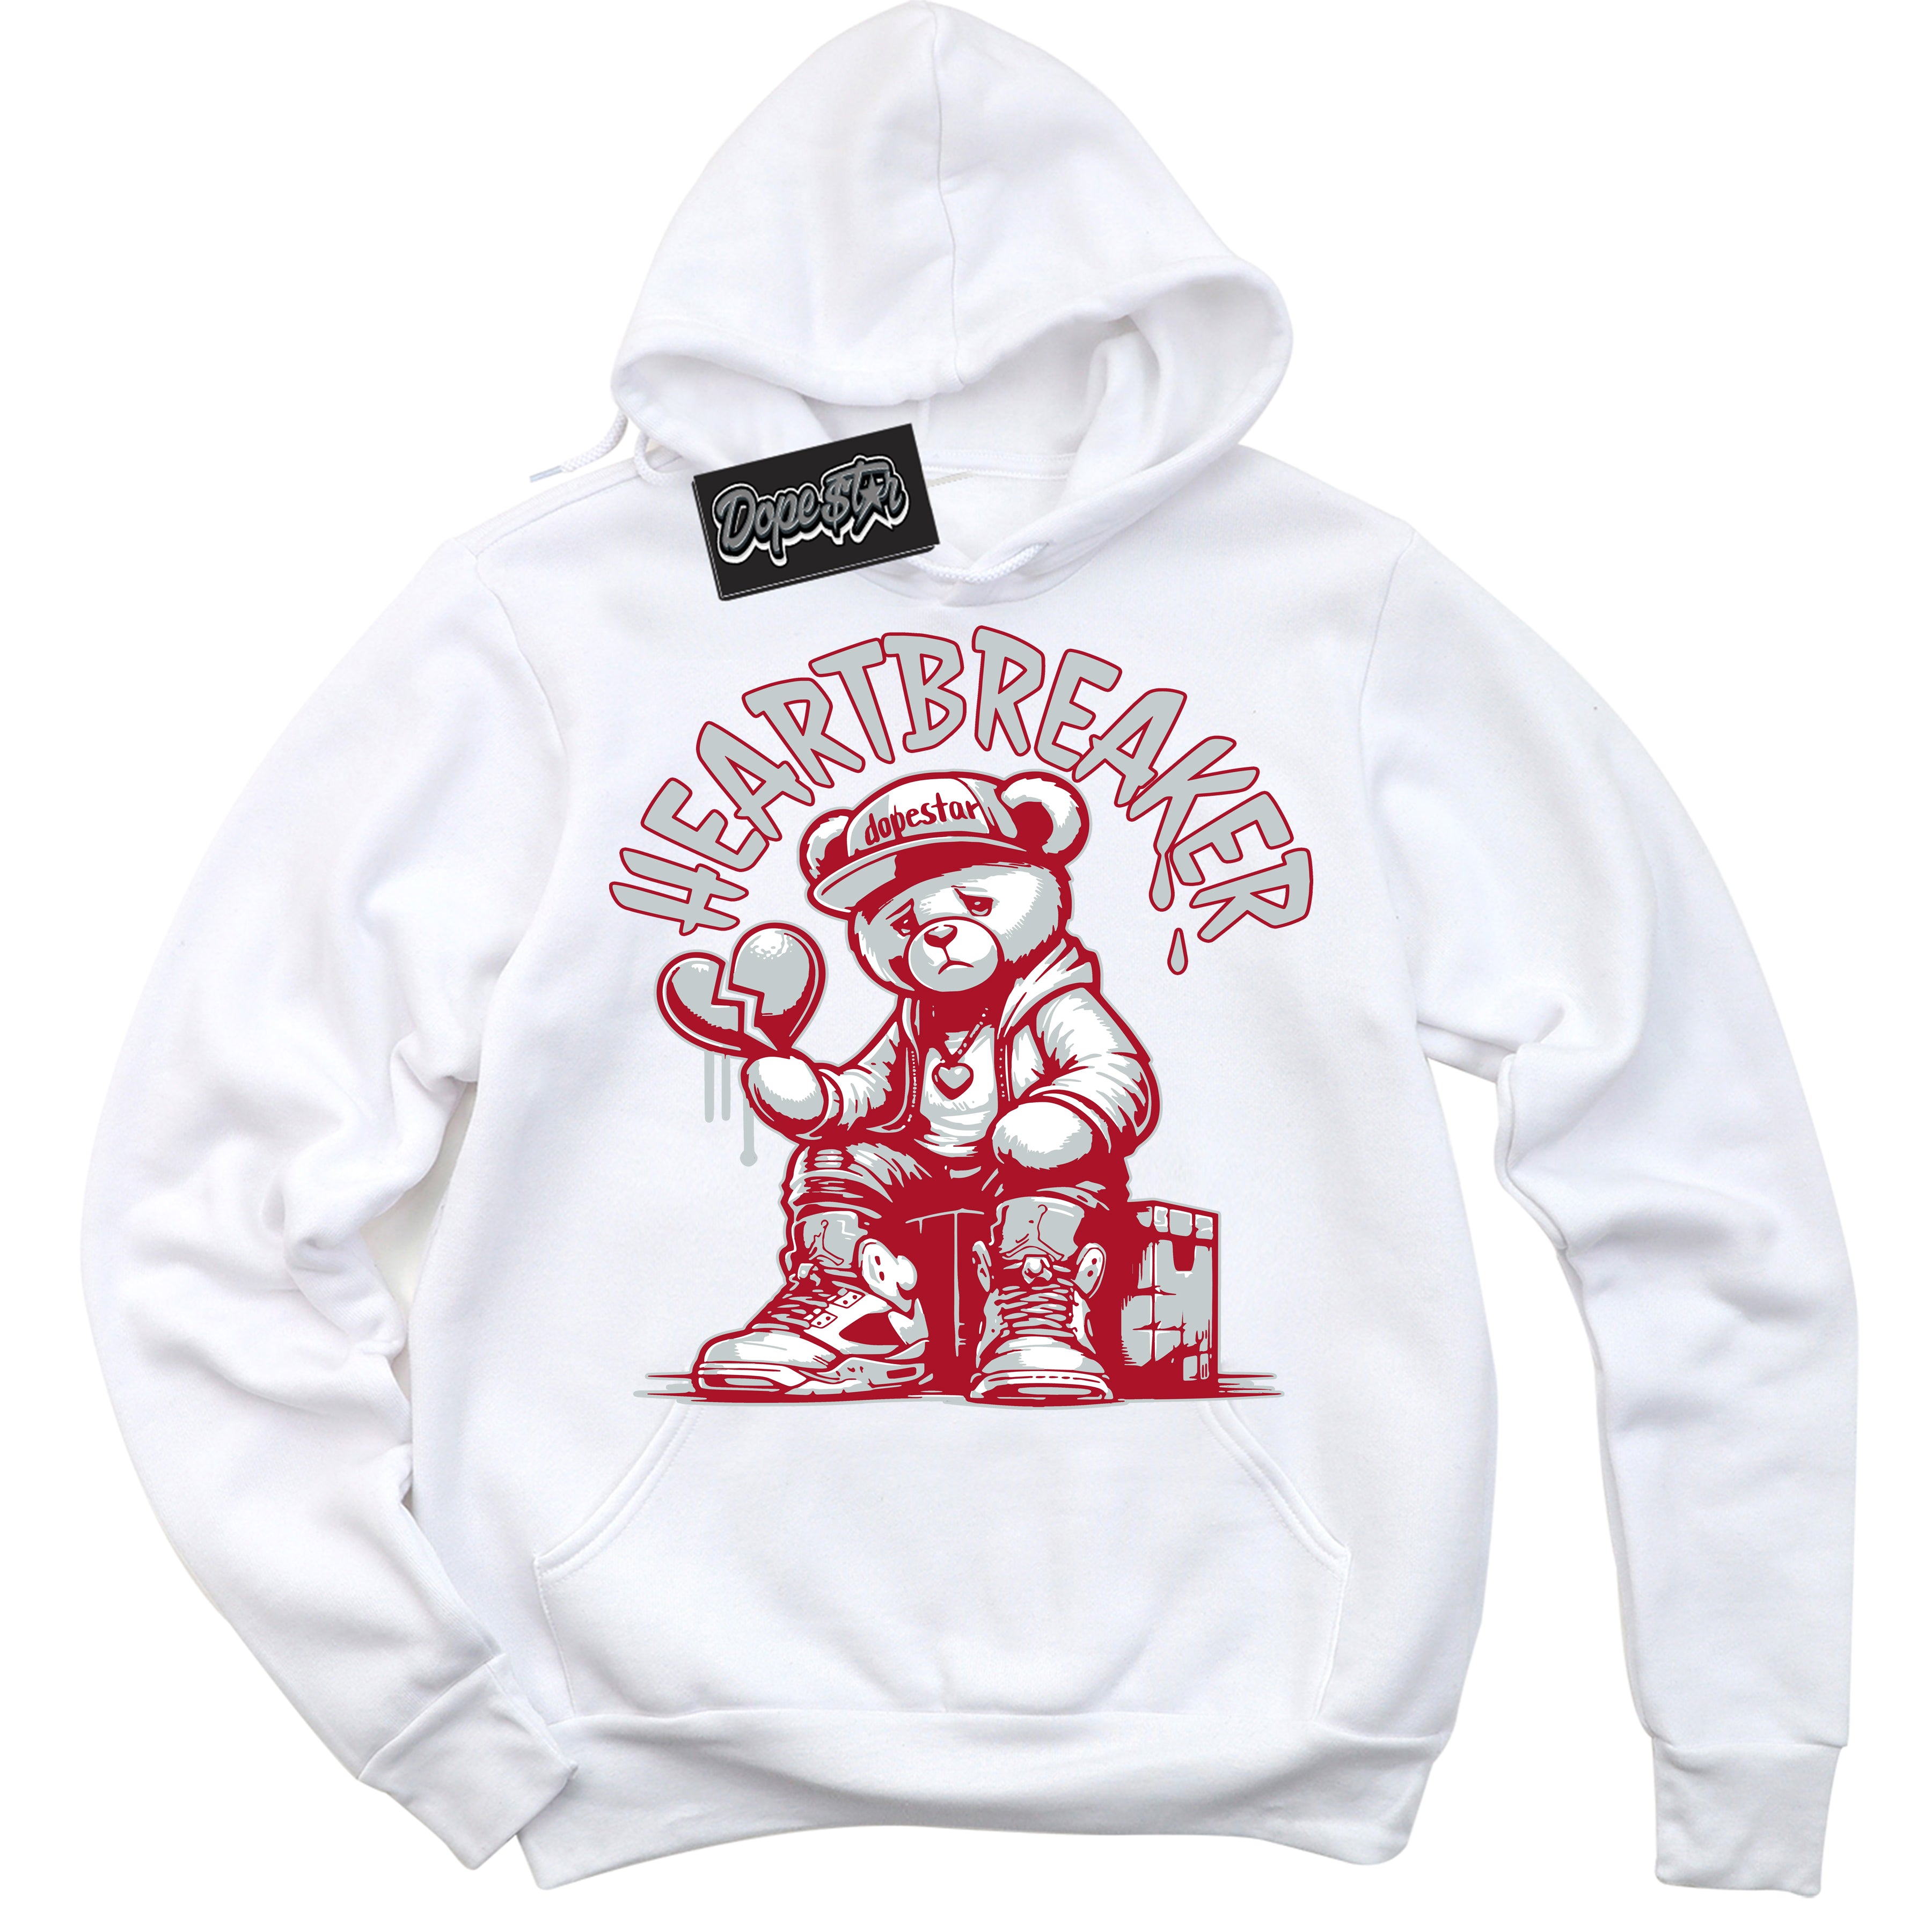 Cool White Hoodie with “ Heartbreaker Bear ”  design that Perfectly Matches Reverse Ultraman Sneakers.